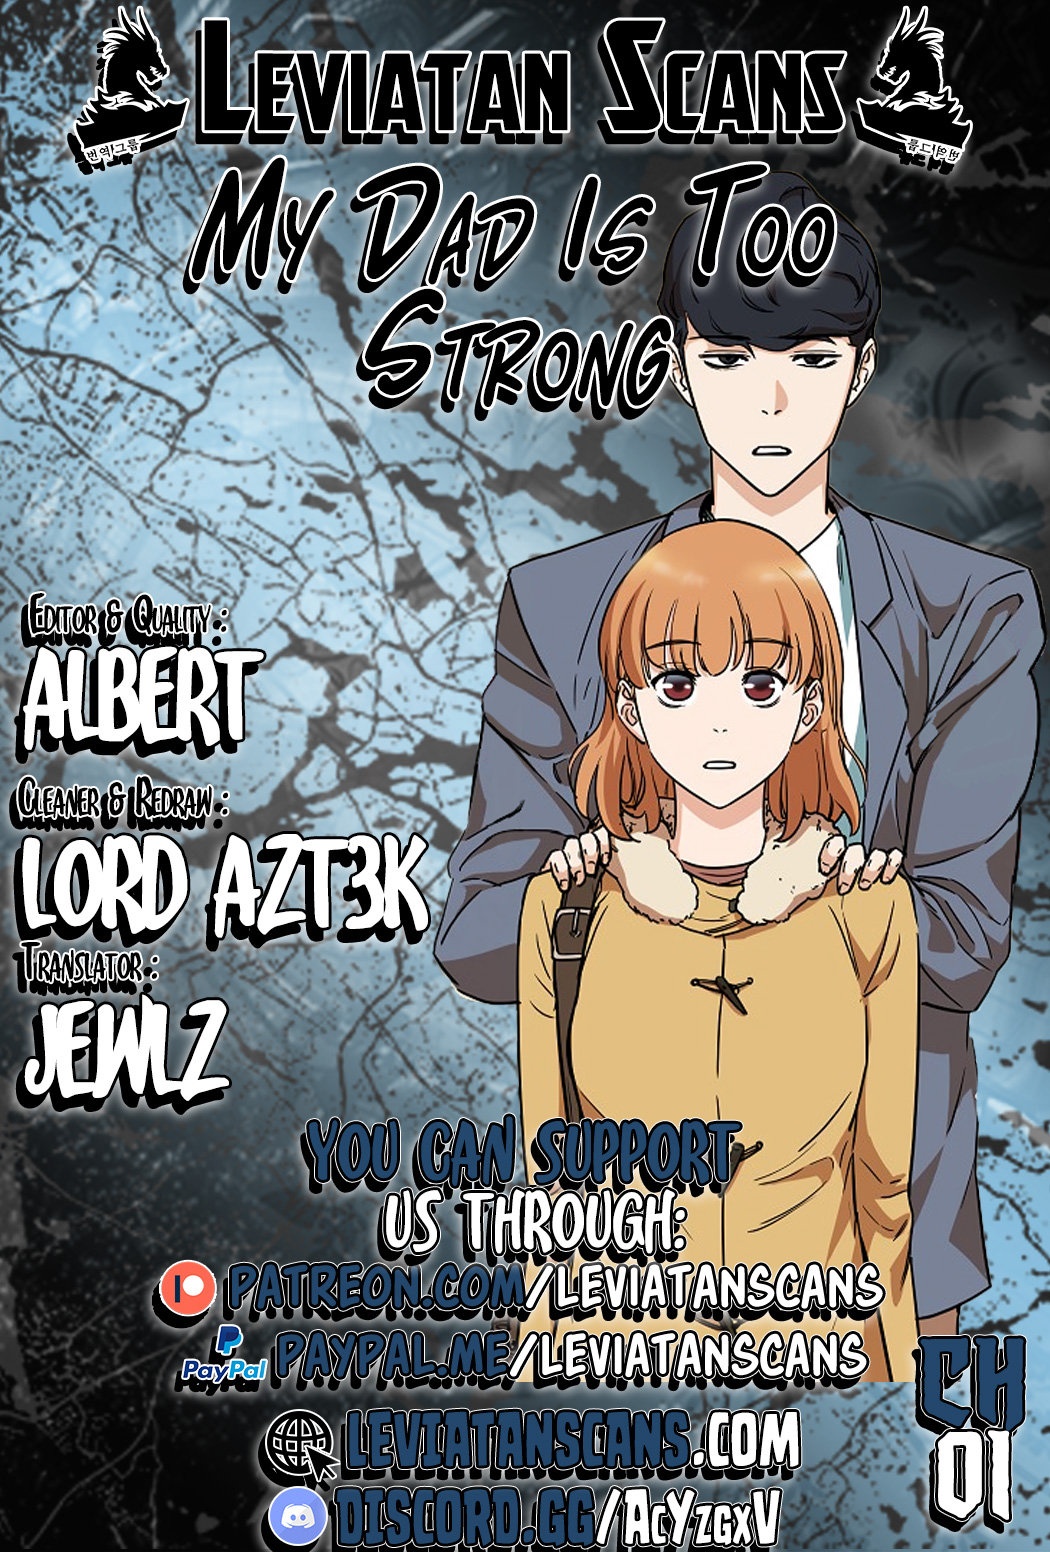 My Dad is Too Strong - Chapter 2580 - Image 1